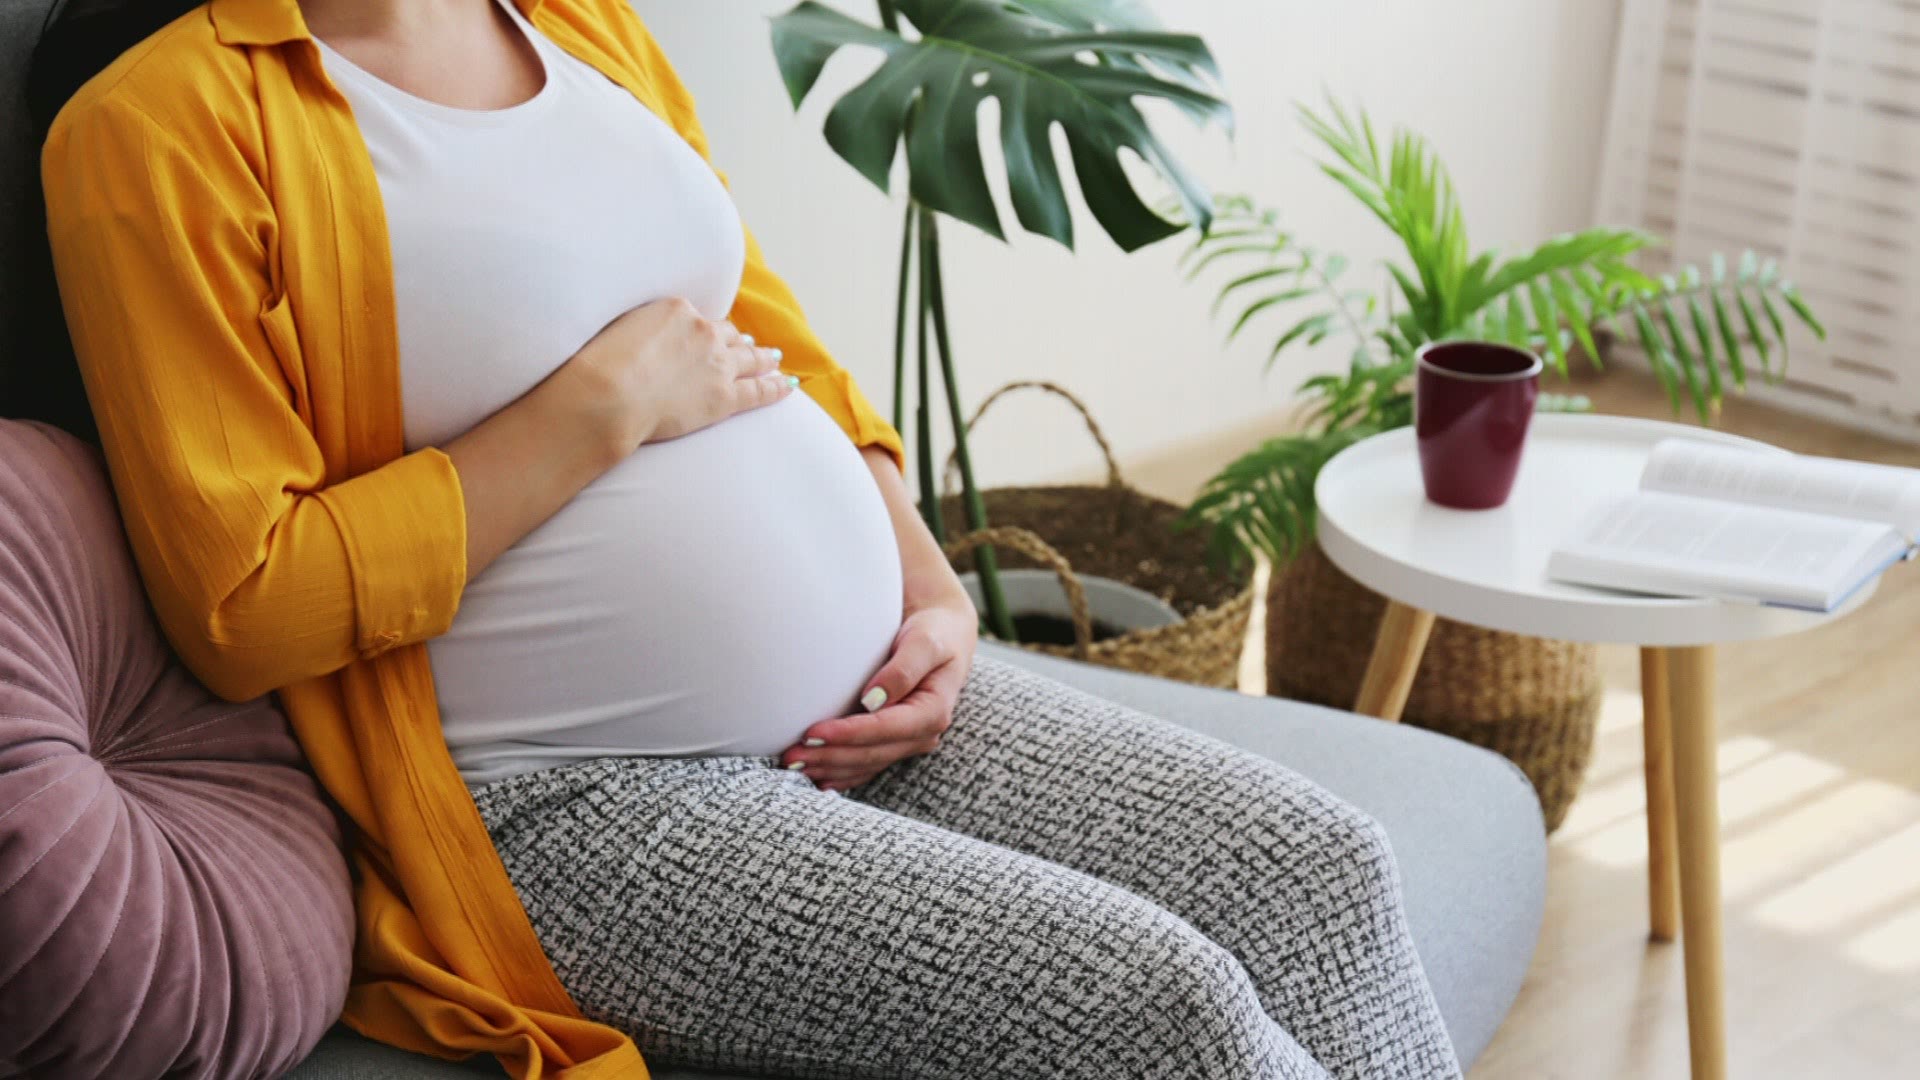 Authors of a new study on the risk of COVID-19 to pregnant women say it reinforces the importance for those women to get vaccinated.